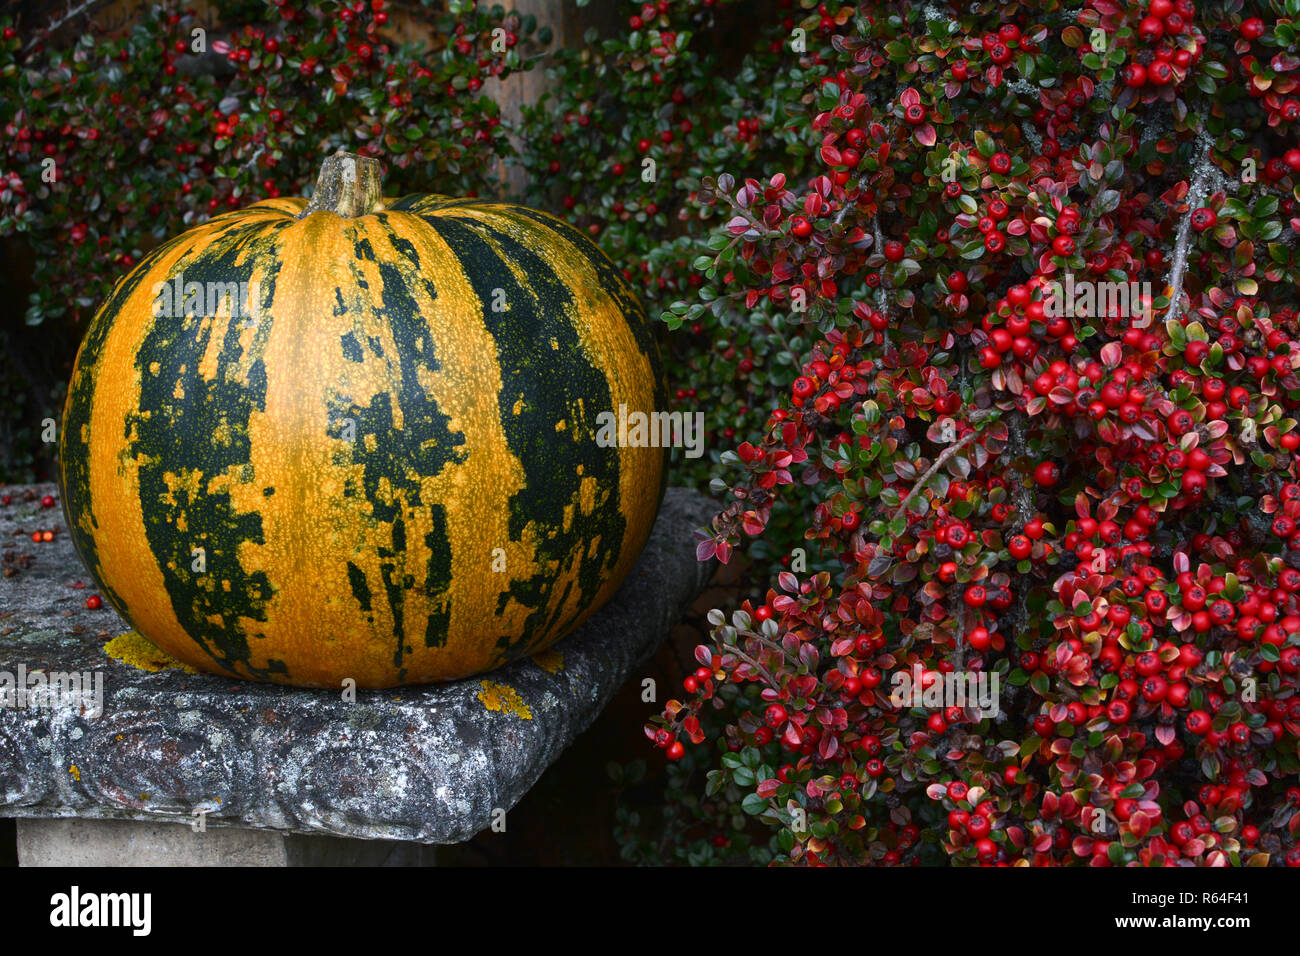 Green and orange striped pumpkin with bright red berries Stock Photo